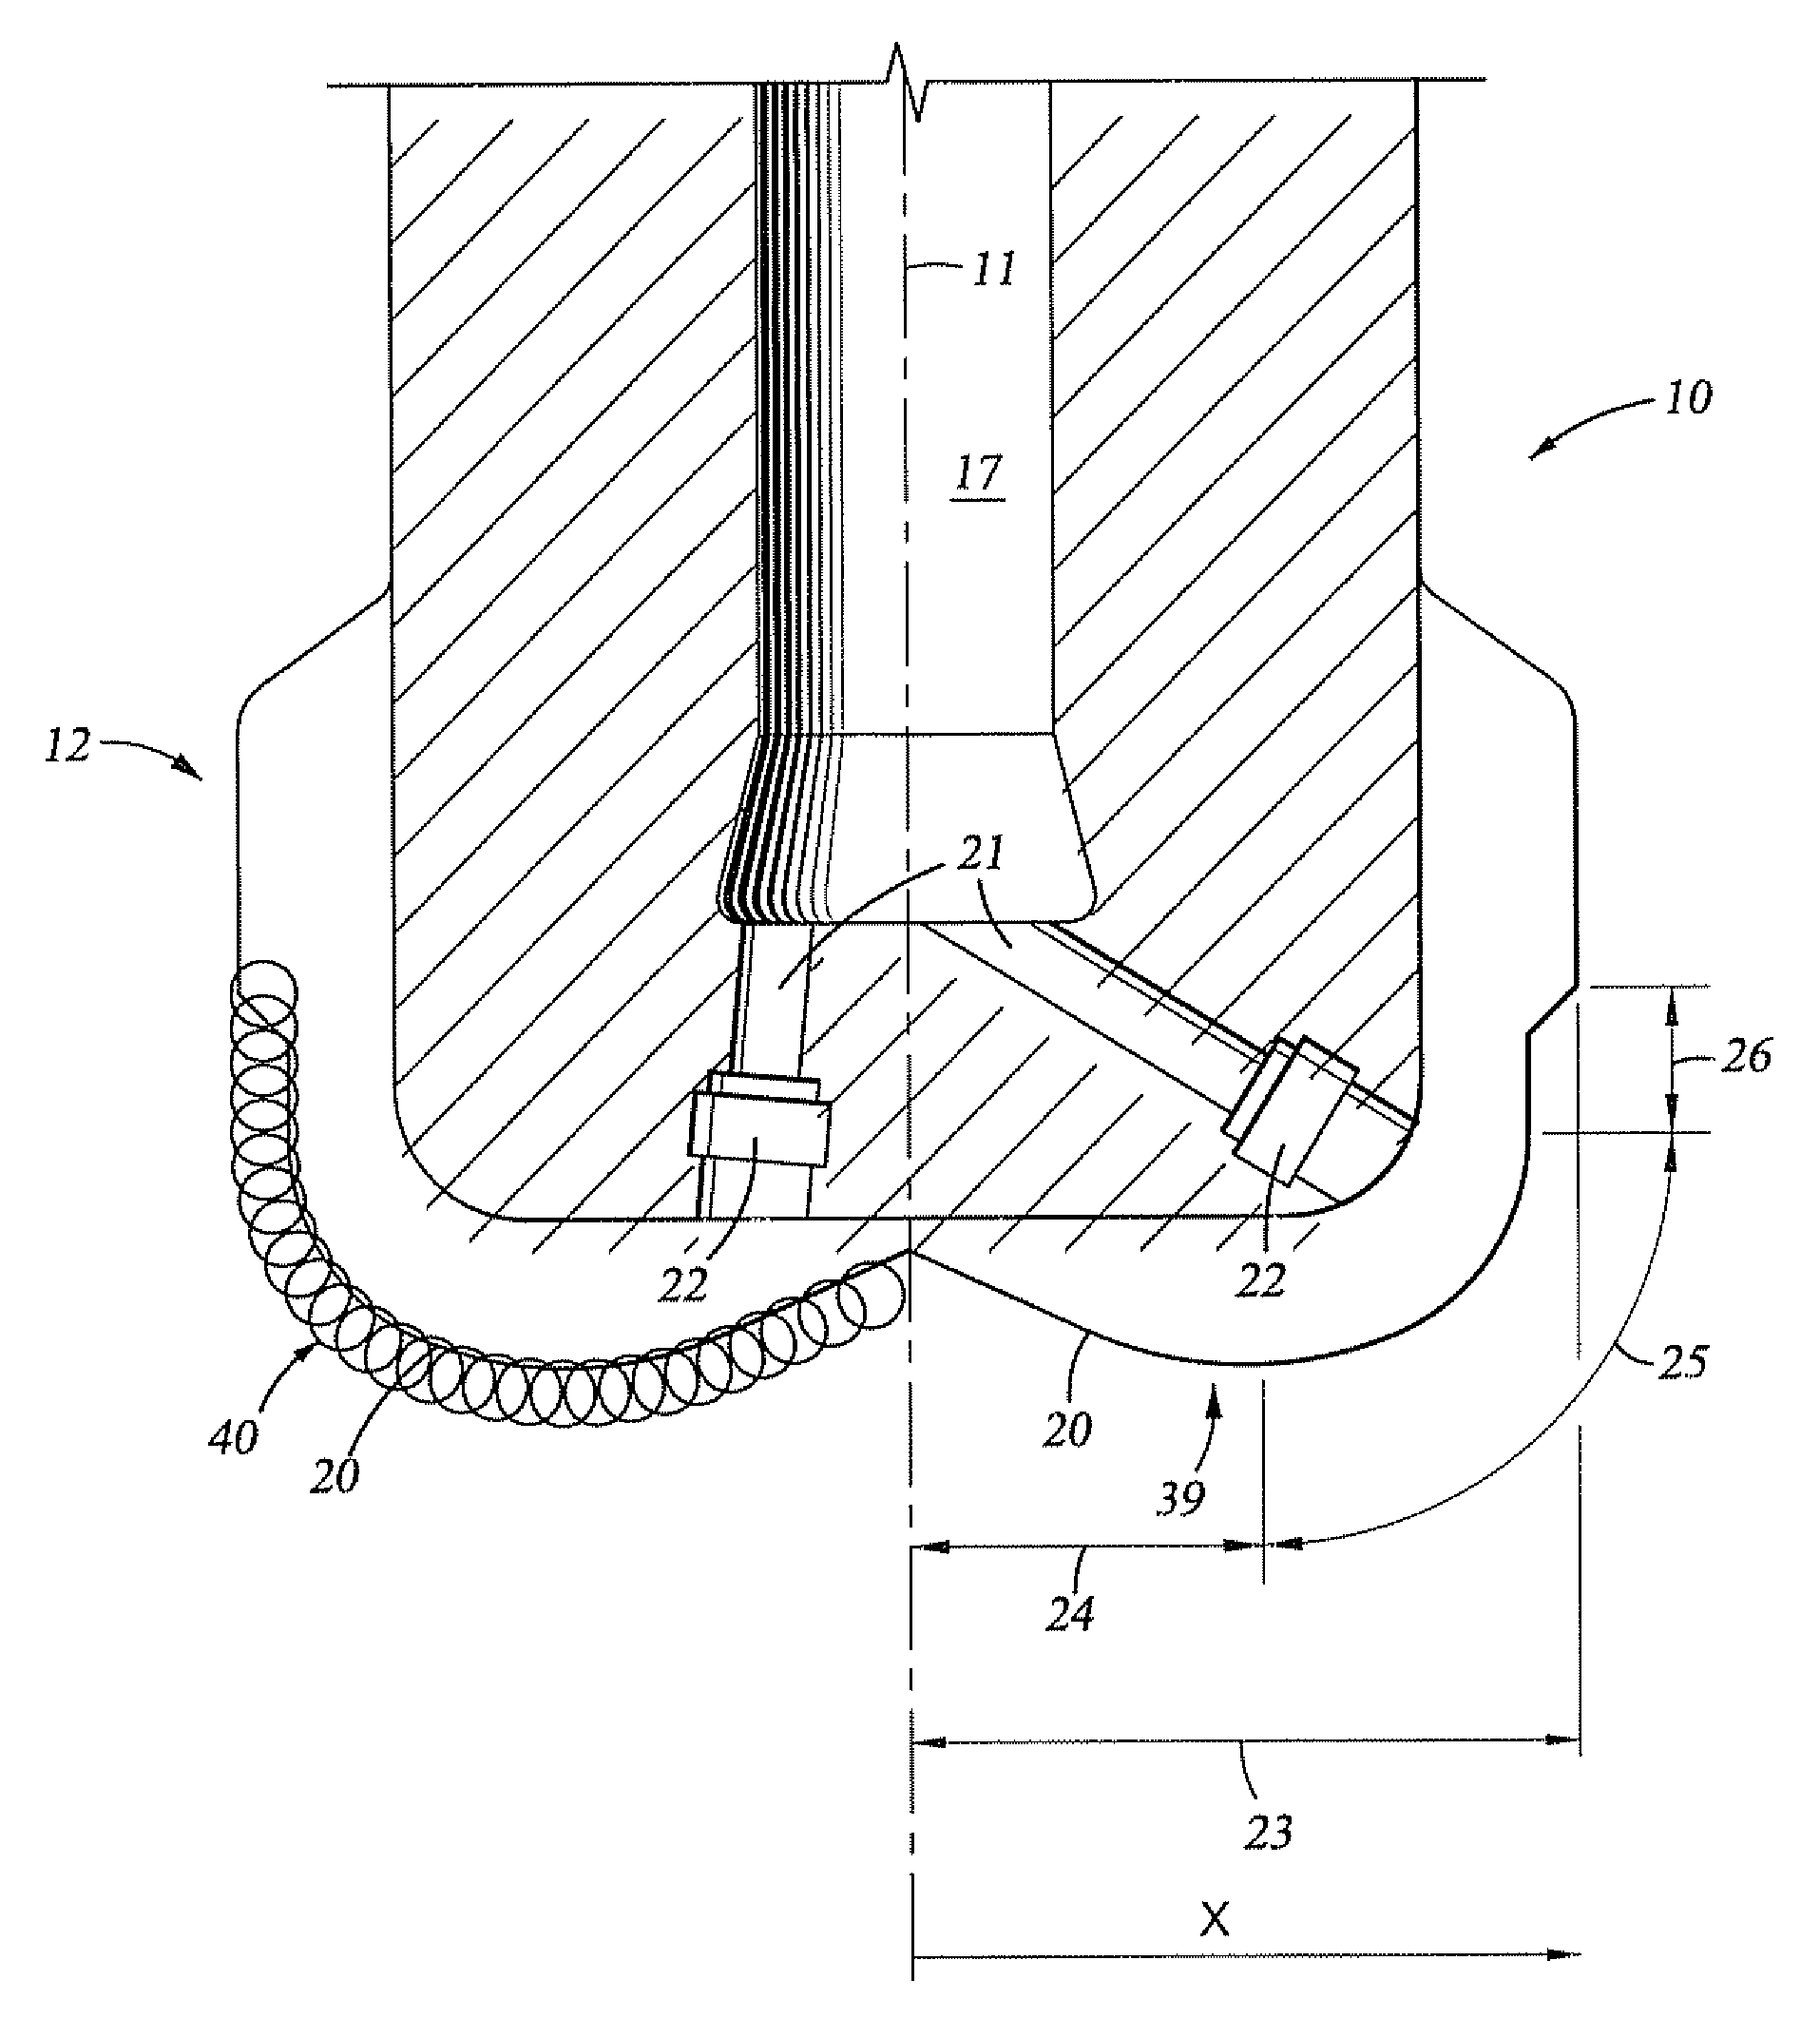 Fixed Cutter Bit With Centrally Positioned Backup Cutter Elements